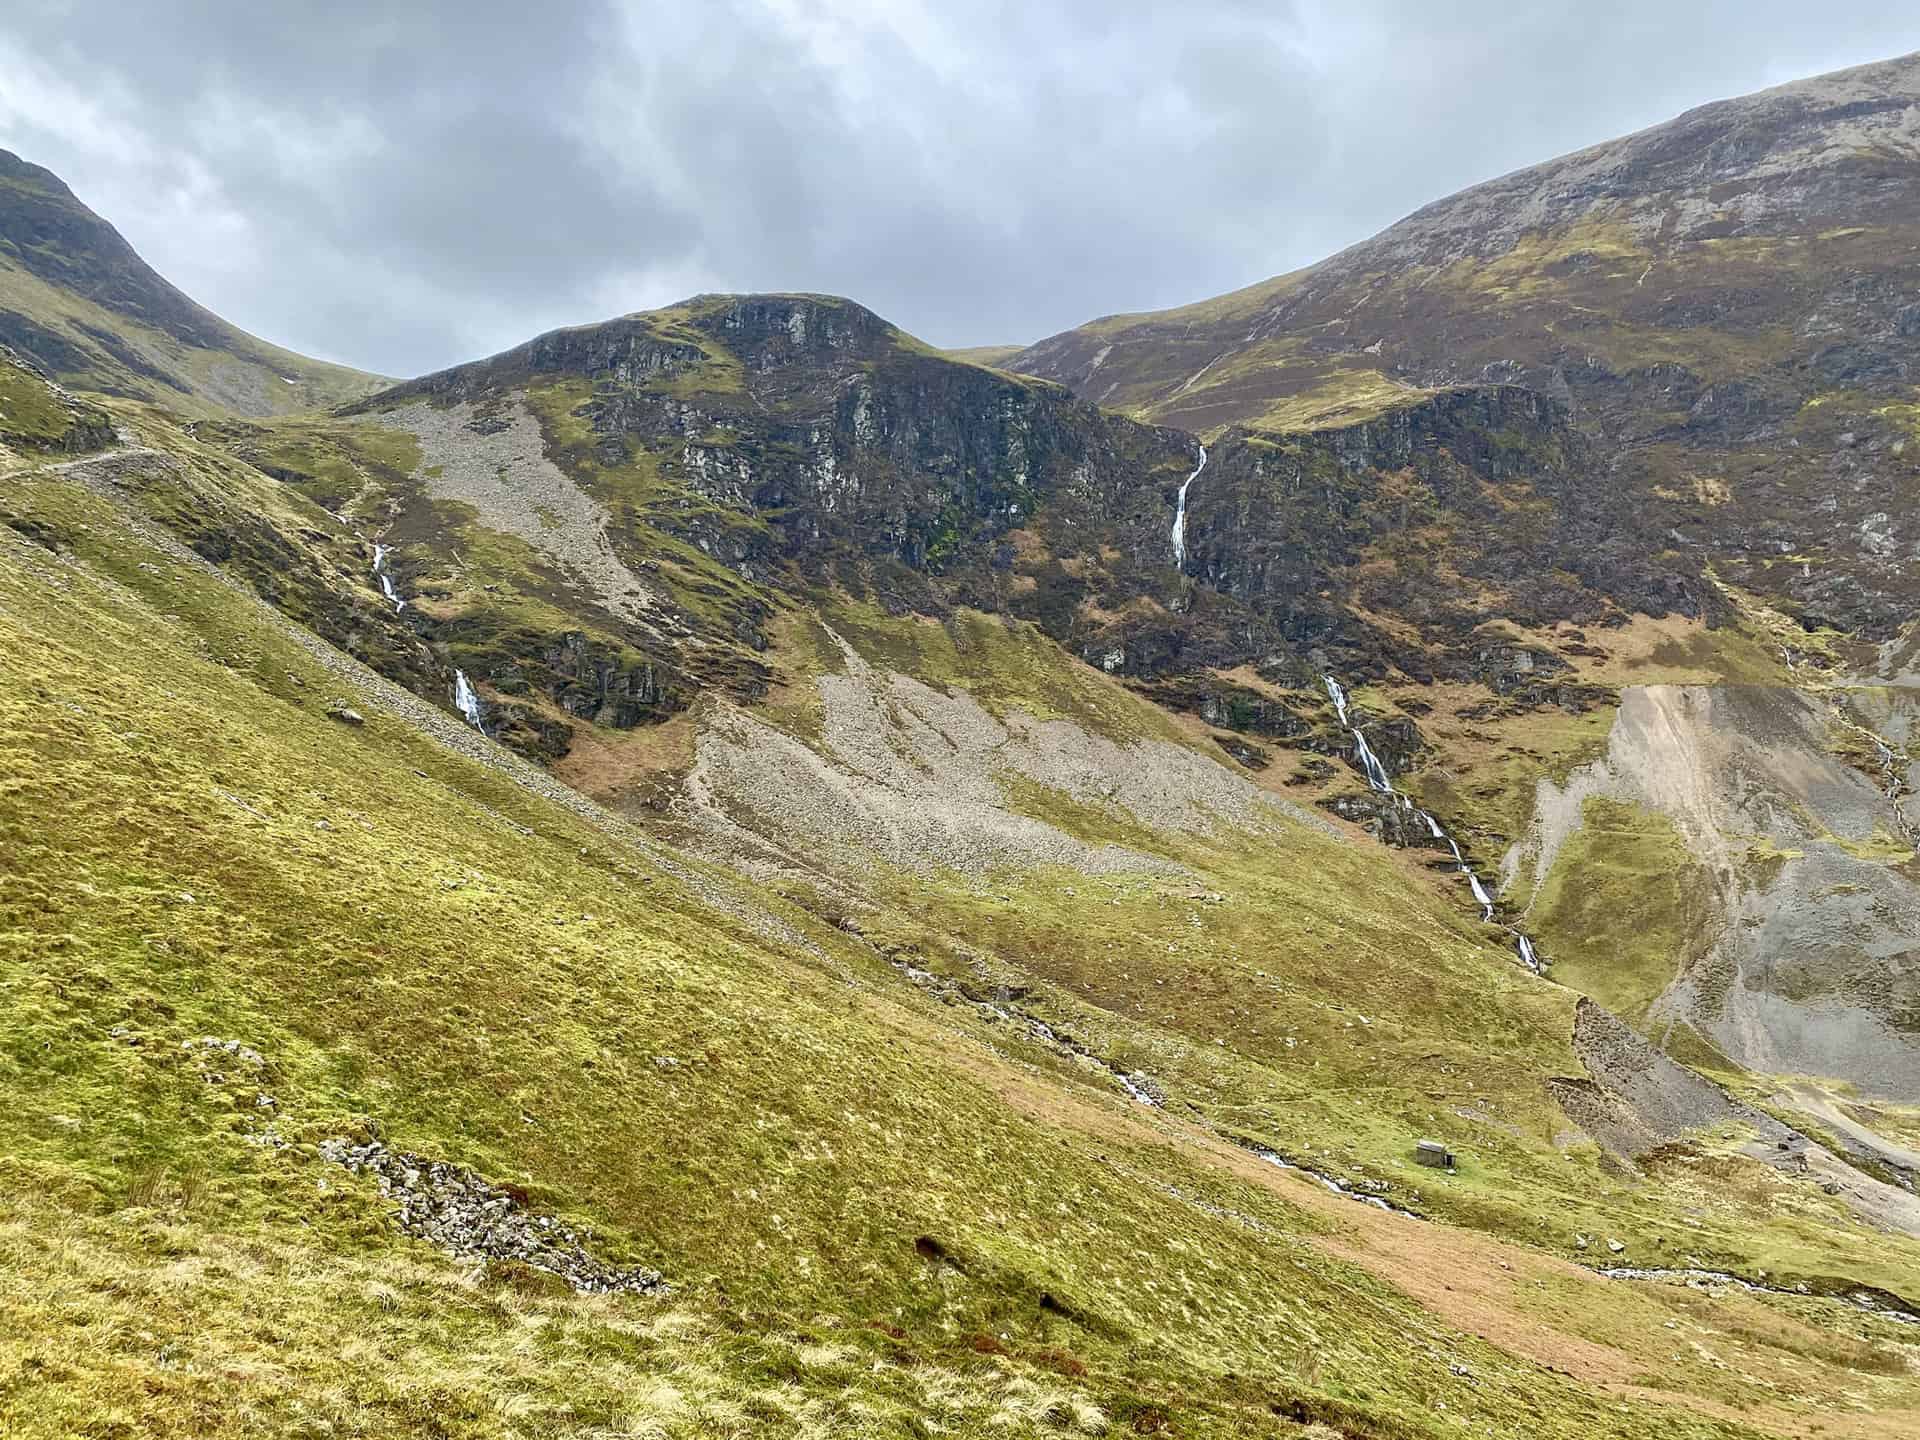 Force Crag, a highlight of this Causey Pike walk.